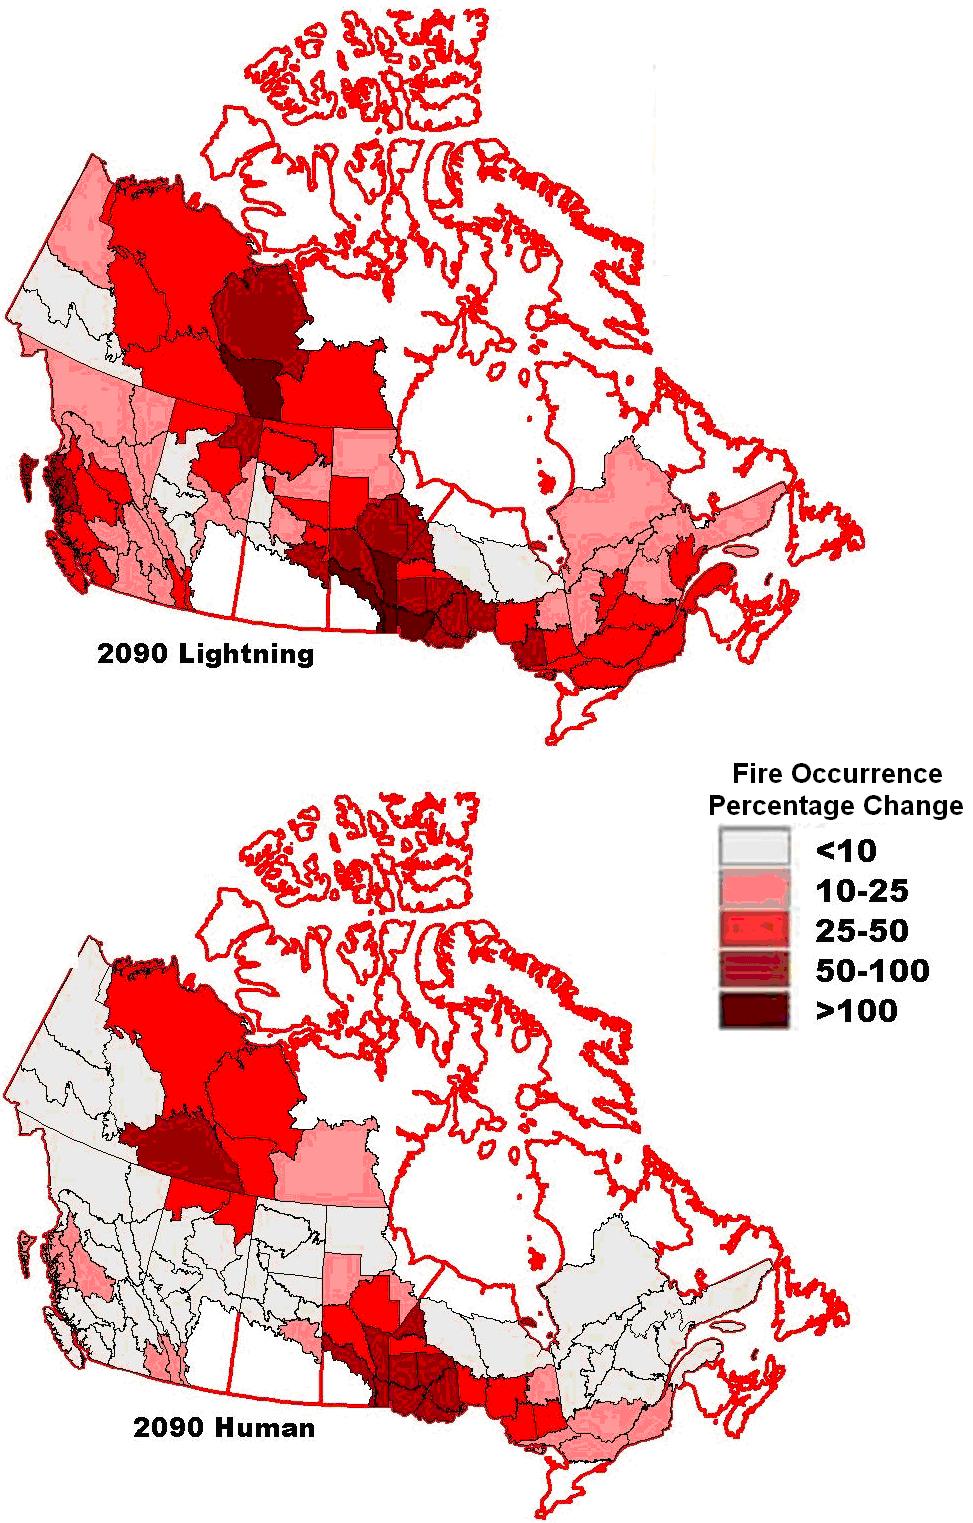 Future Fire Occurrence Increases in human and lightning-caused fires Conservative as these changes driven by fuel moisture changes alone.